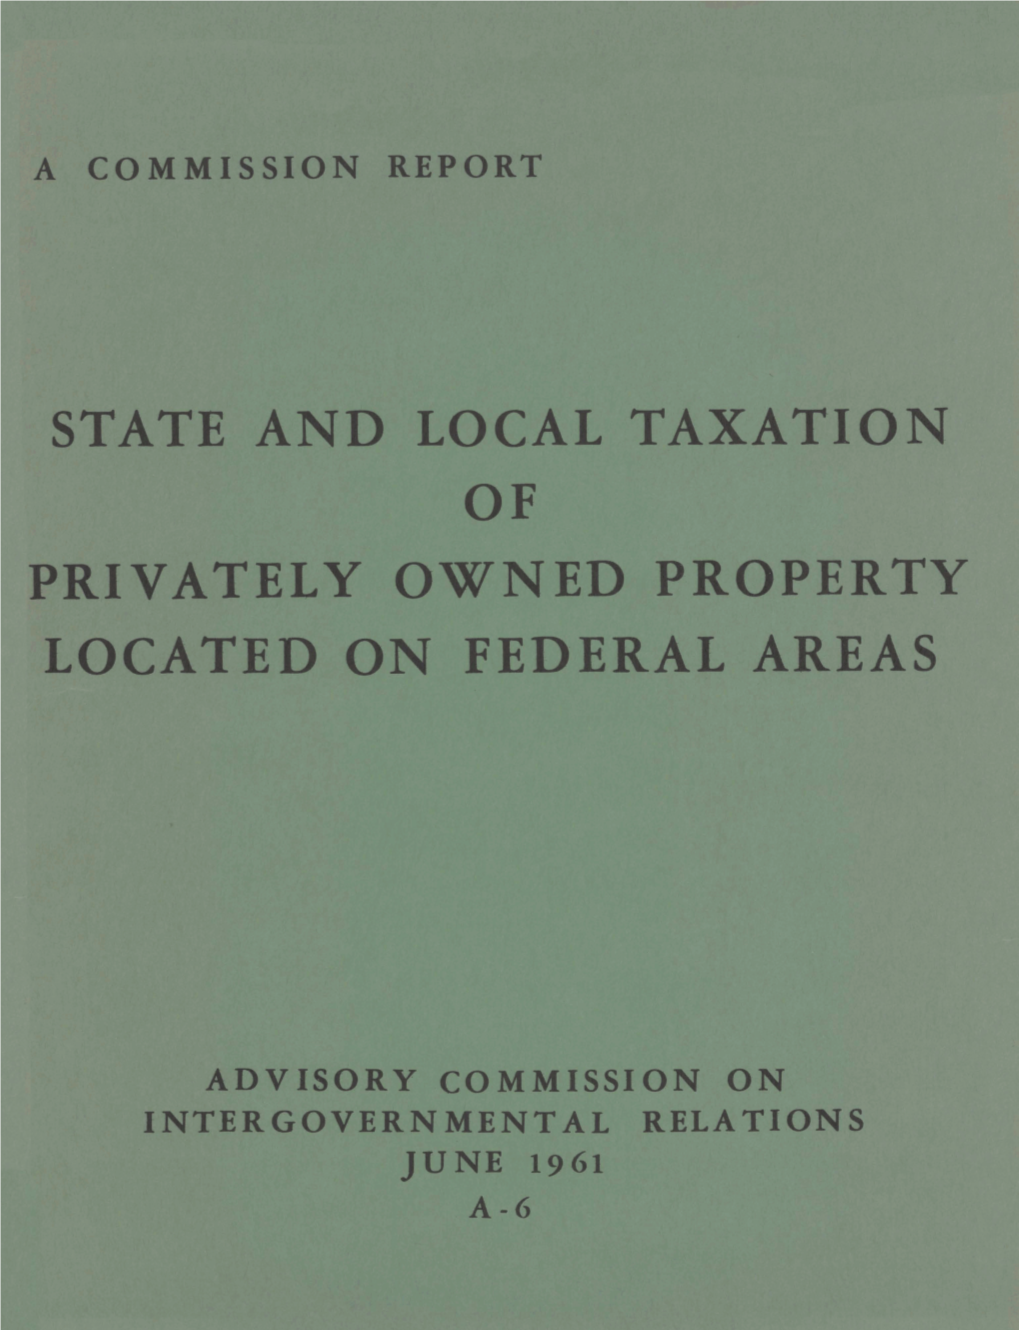 State and Local Taxation of Privately Owned Property Located on Federal Areas (A-6)